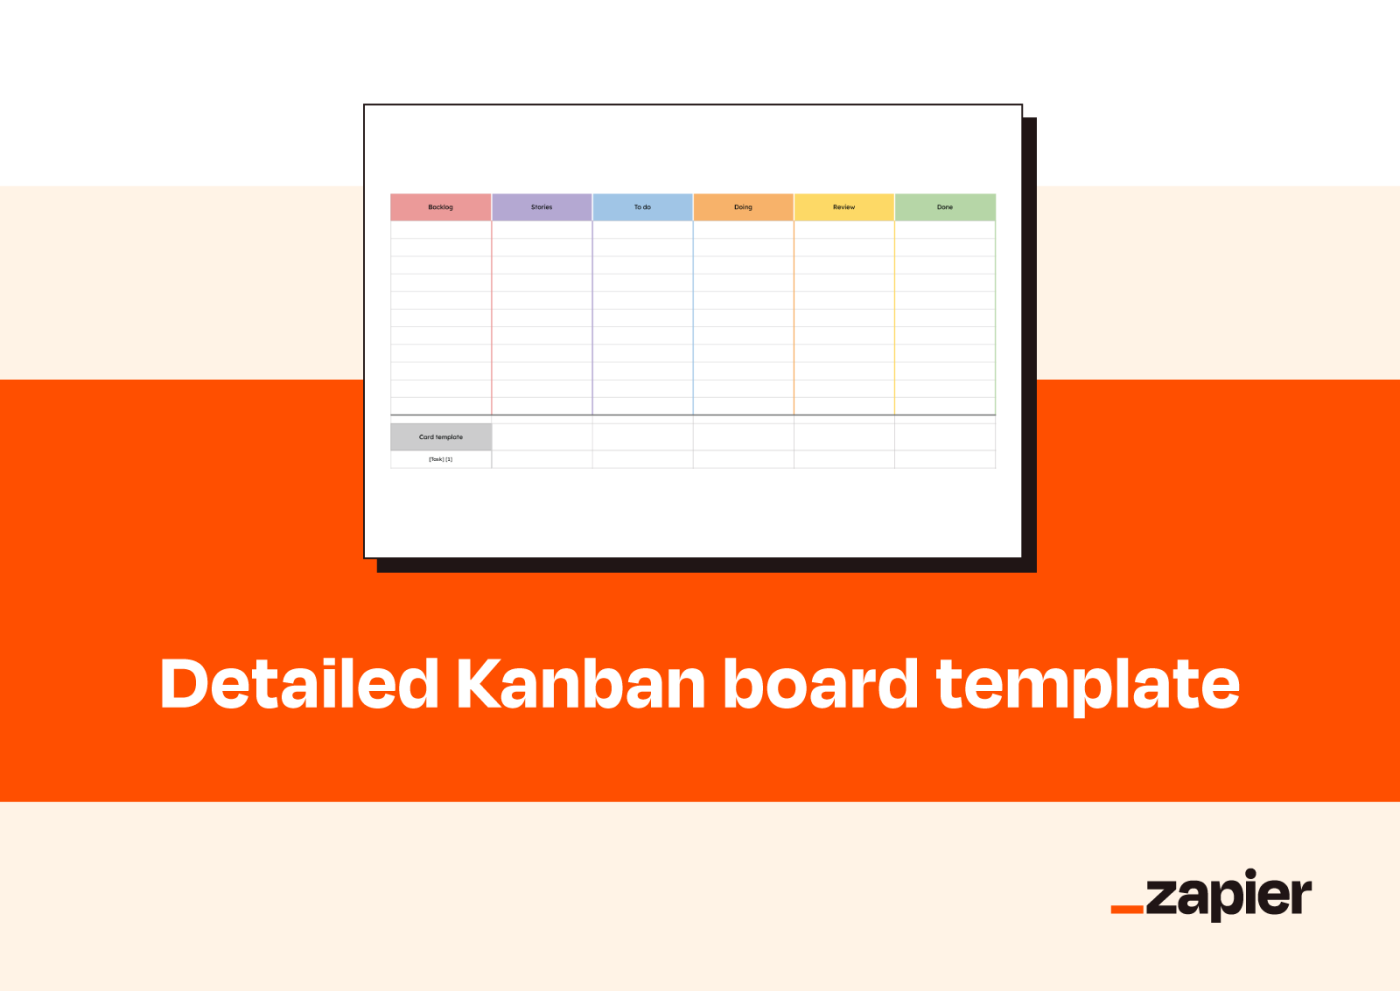 Graphic reading Detailed Kanban board template with screenshot of the template.